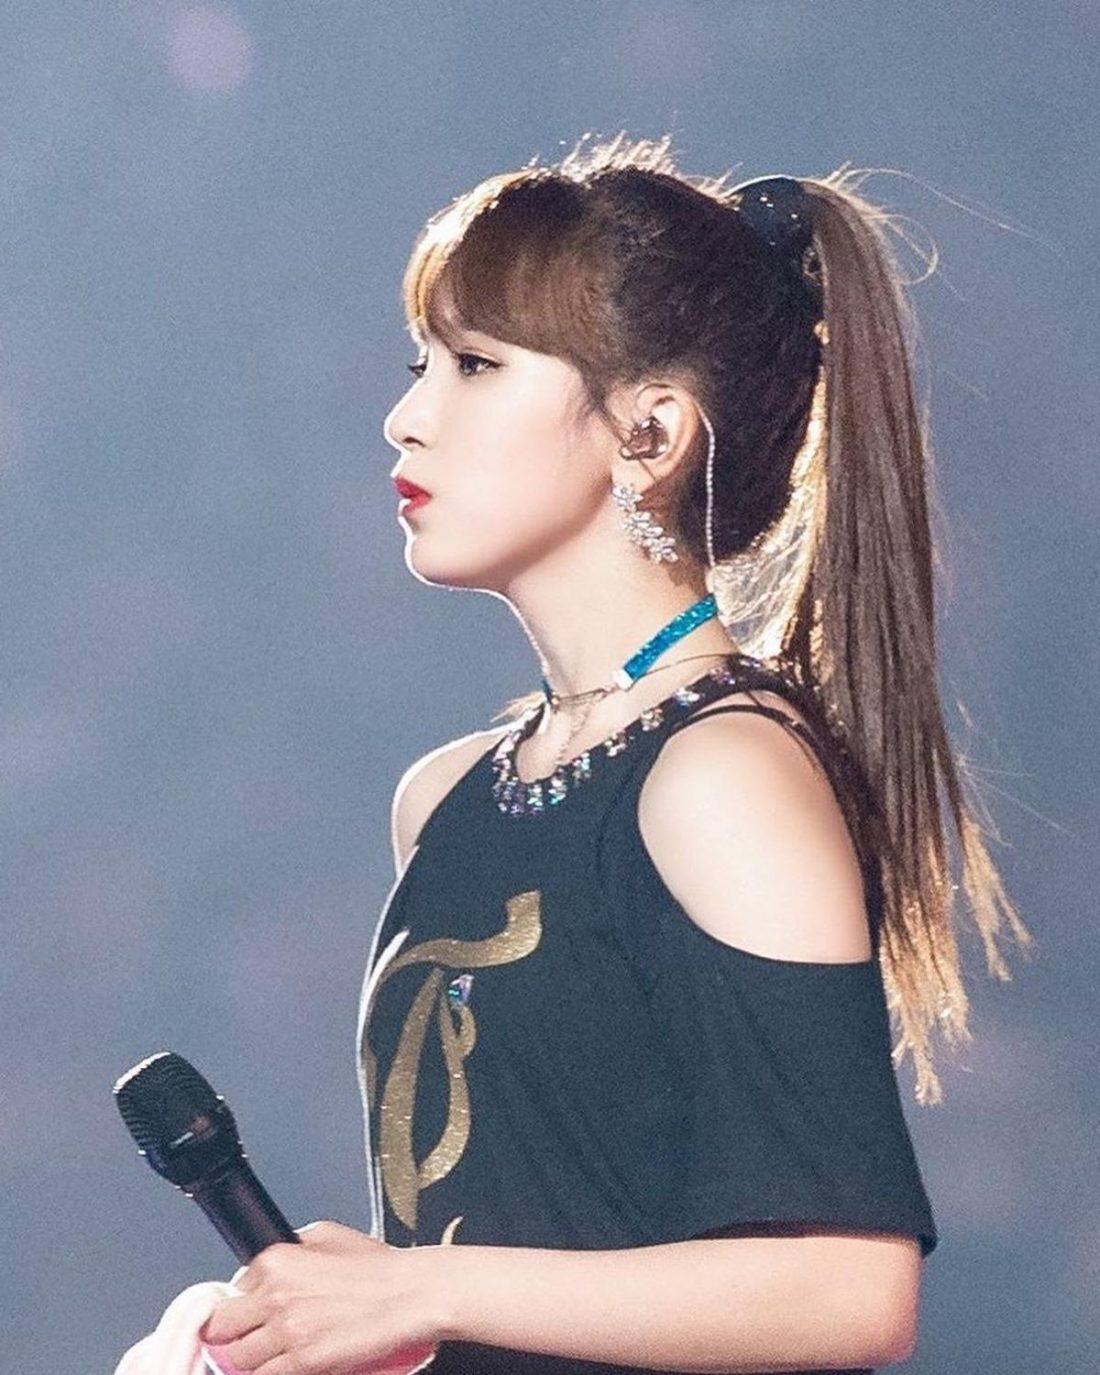 Singer wearing in-ear monitors during a live performance (From: gramho.com/profile/twice.no.toliko/).